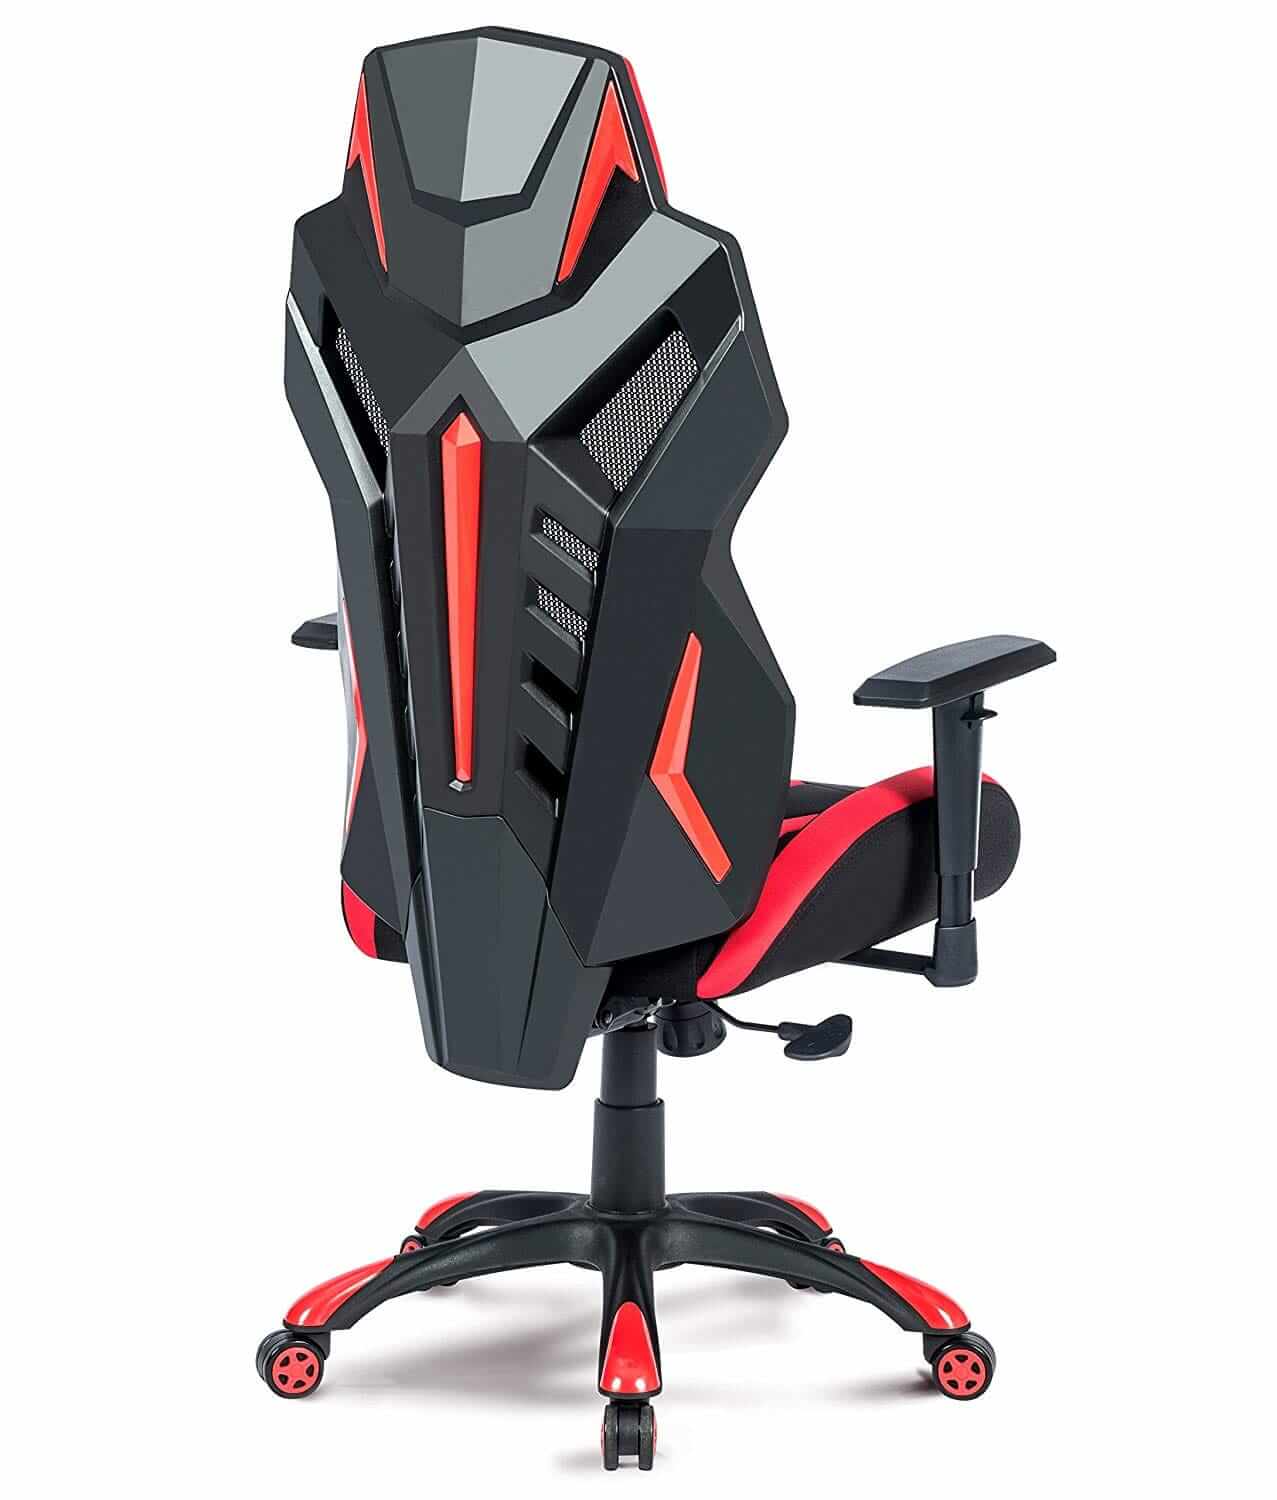 Top 9 Red Chair Reviews - Chair Central